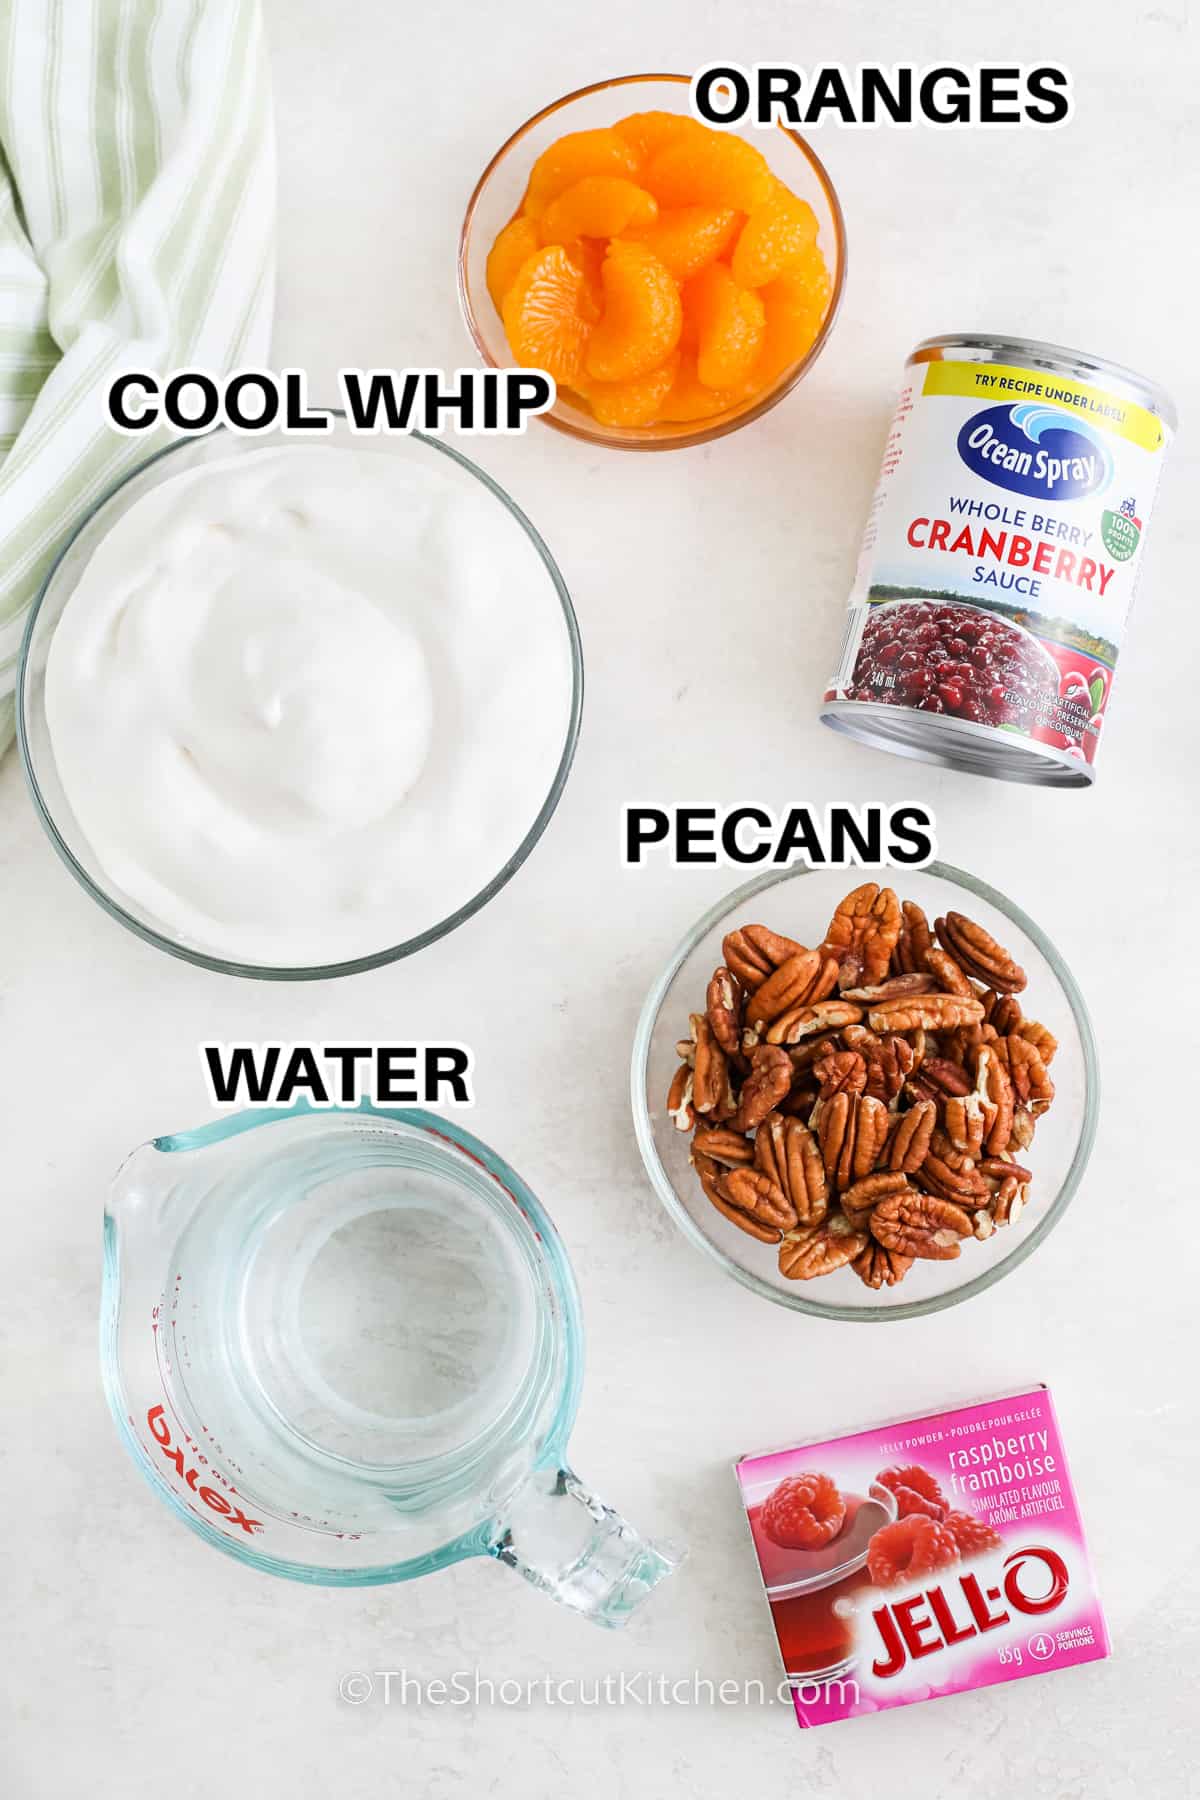 ingredients to make cranberry jello salad including oranges, cool whip, cranberry sauce, pecans, water, and jello